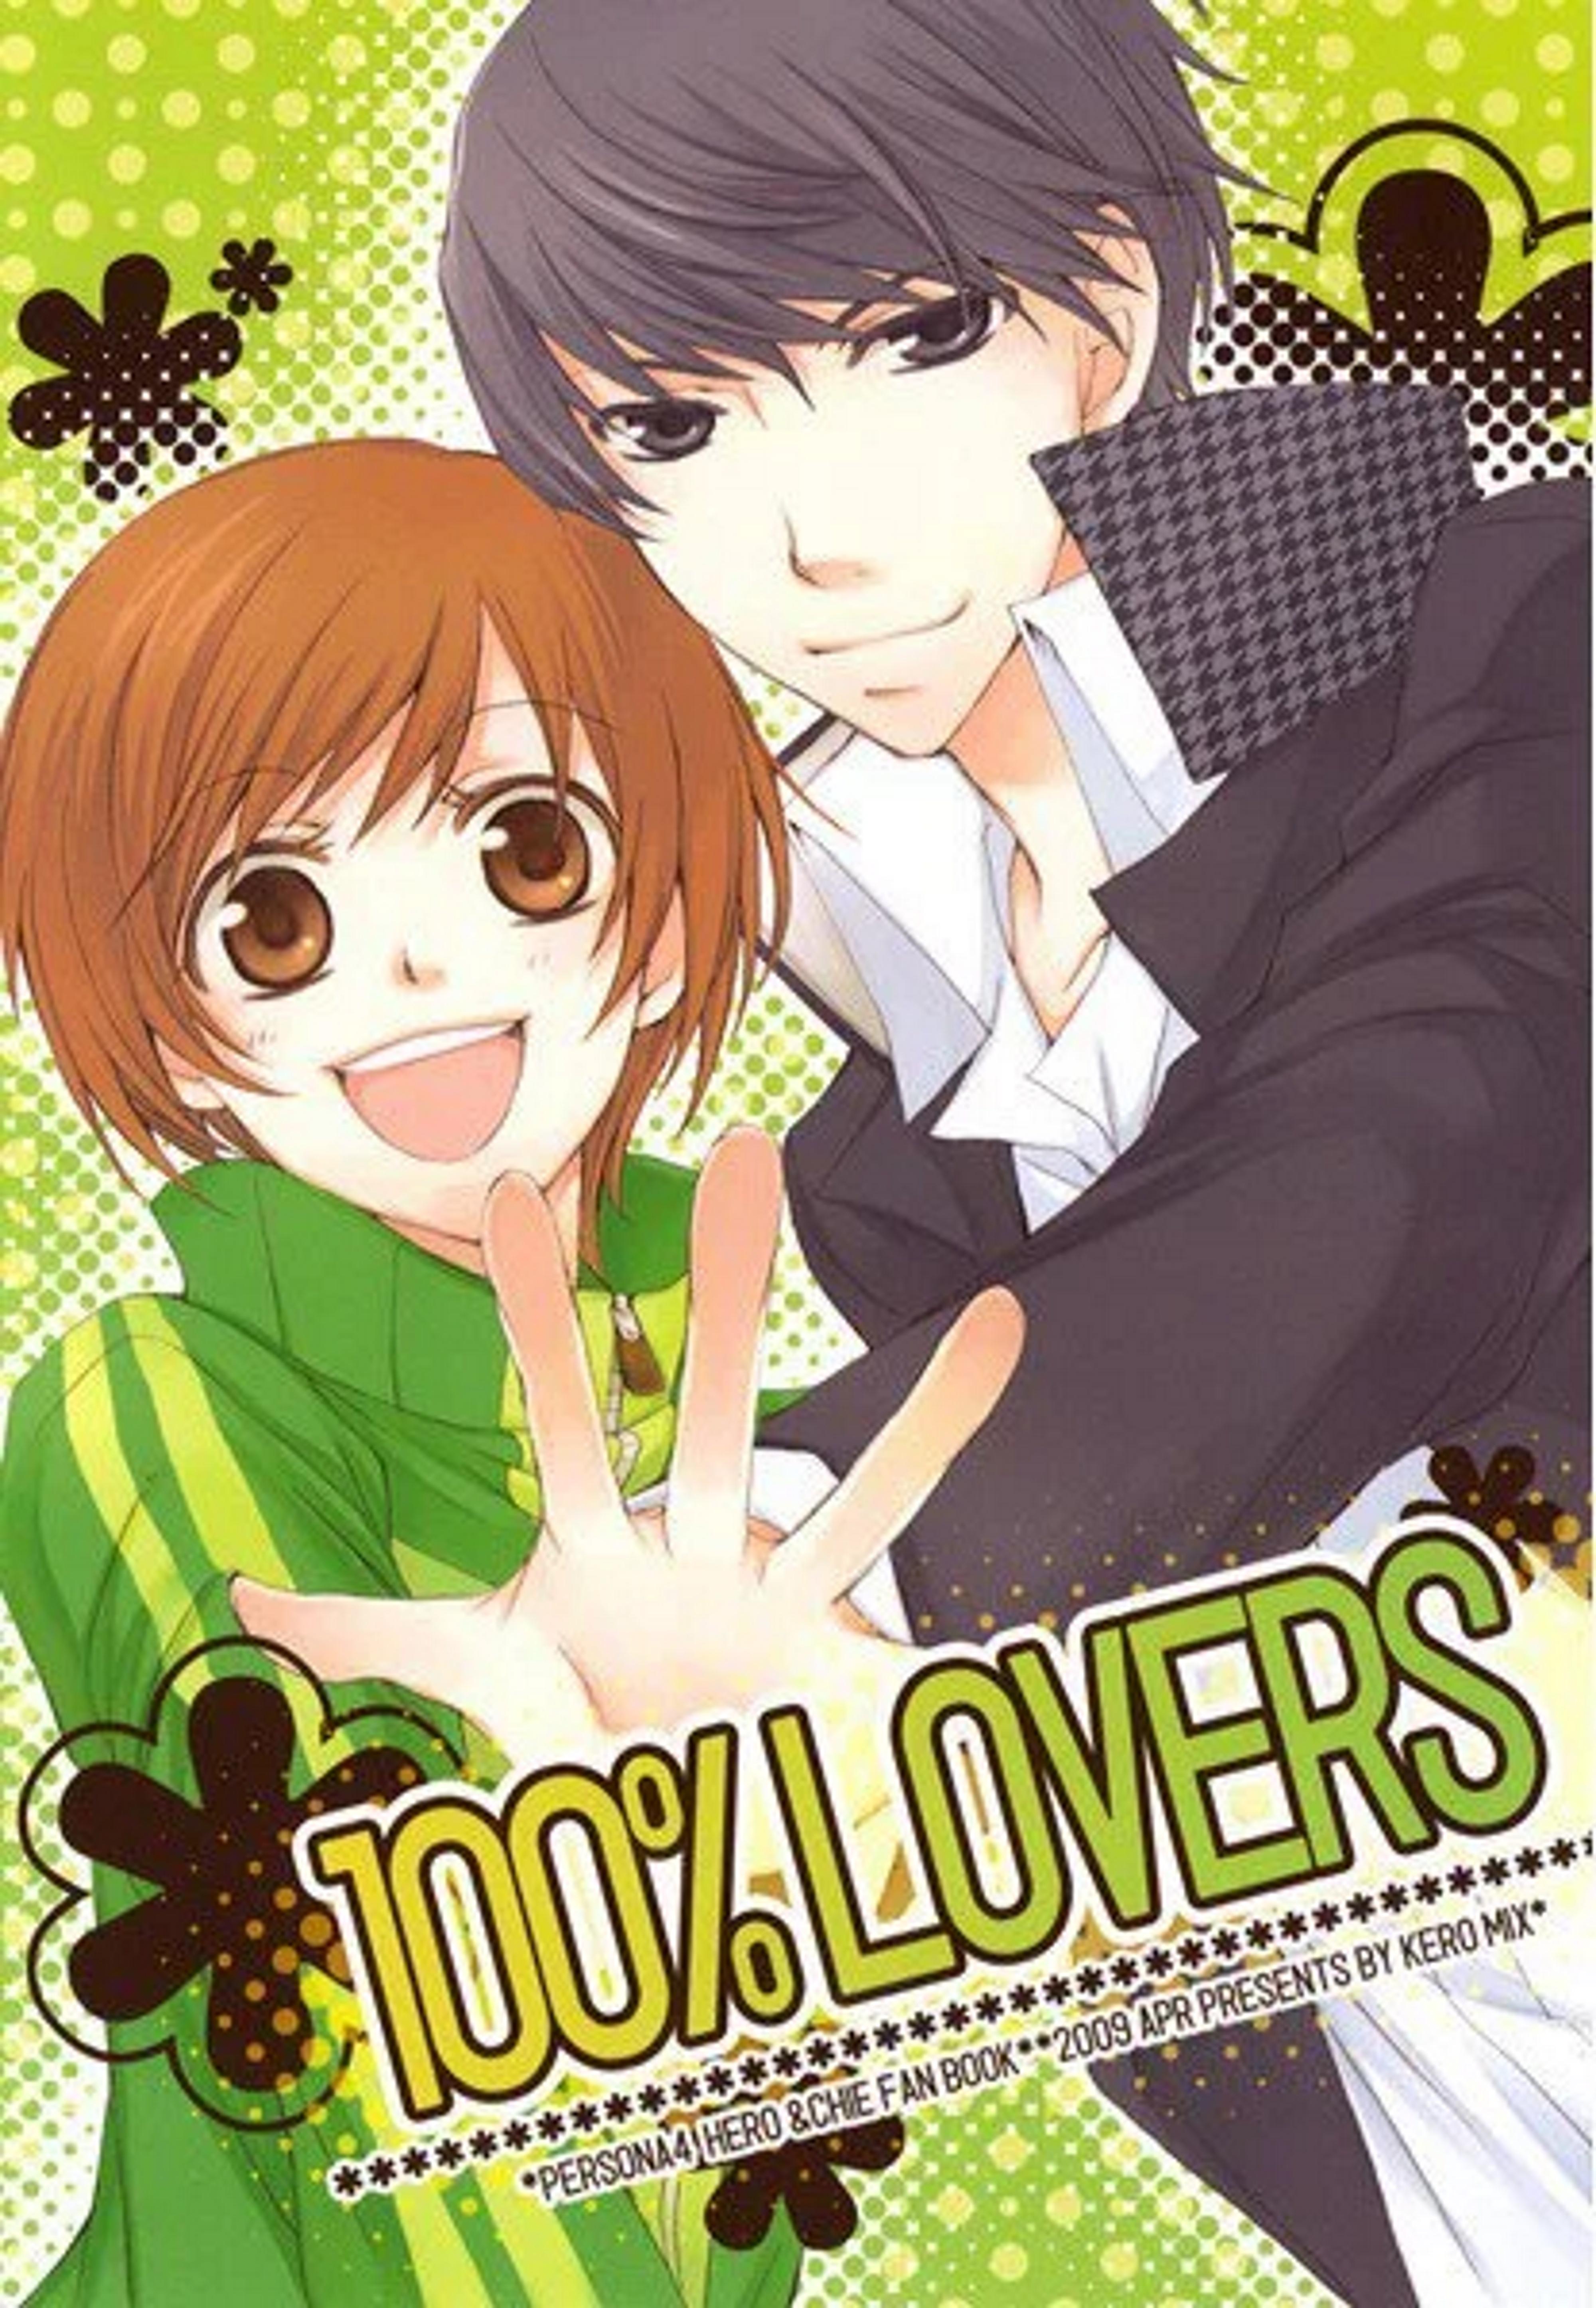 Persona 4 - 100% Lovers Chapter 1 #1